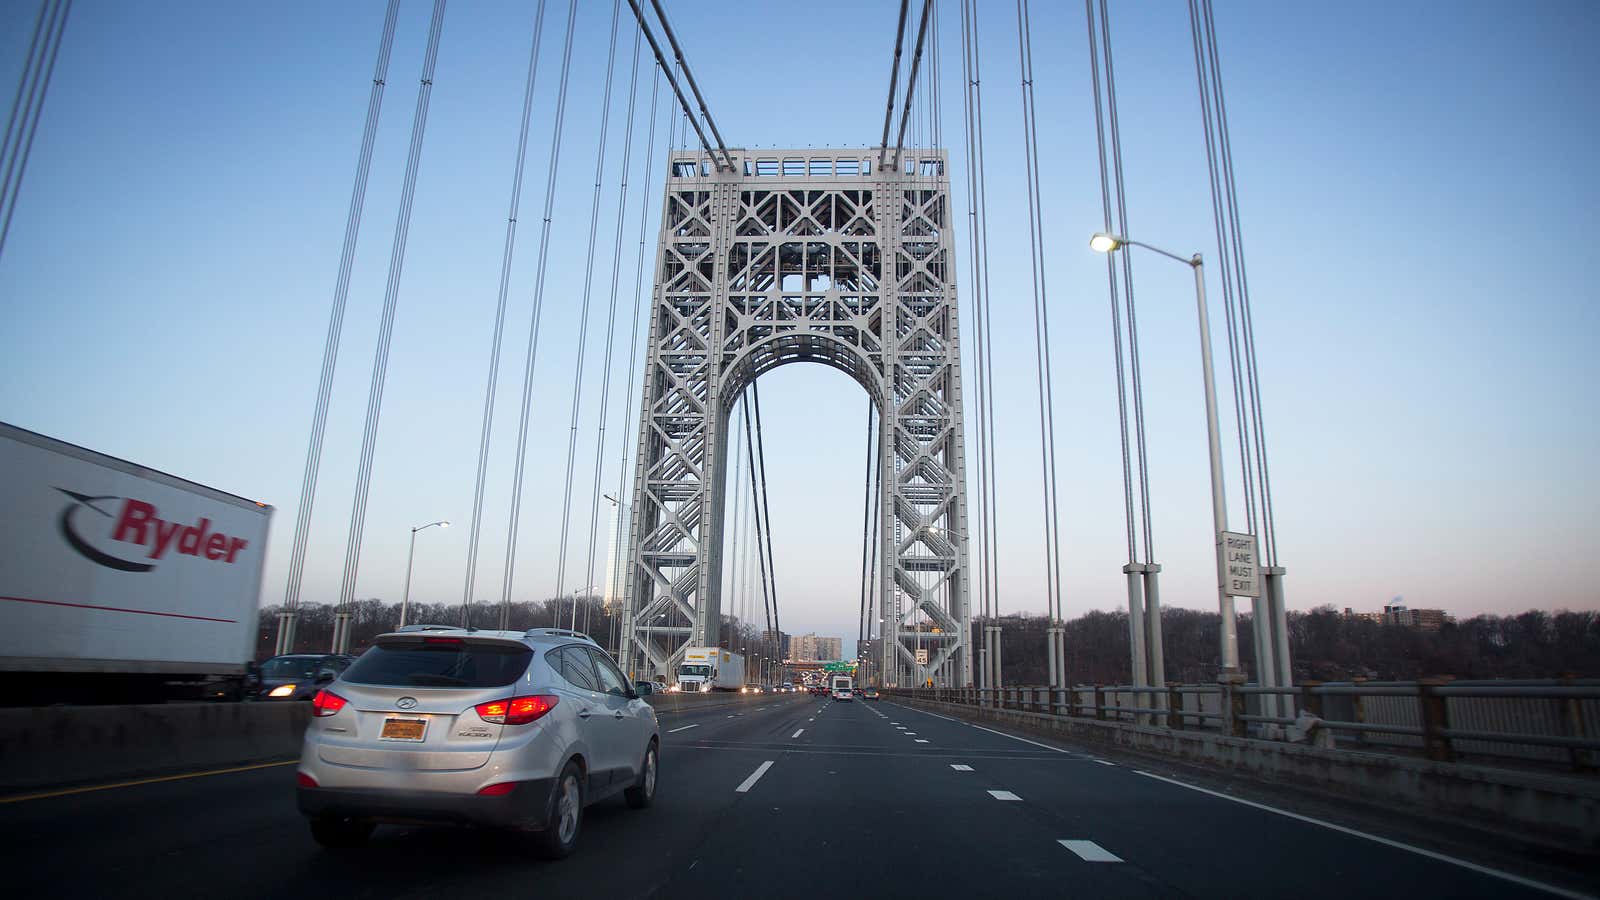 Traffic coming onto the George Washington bridge was snarled for days.